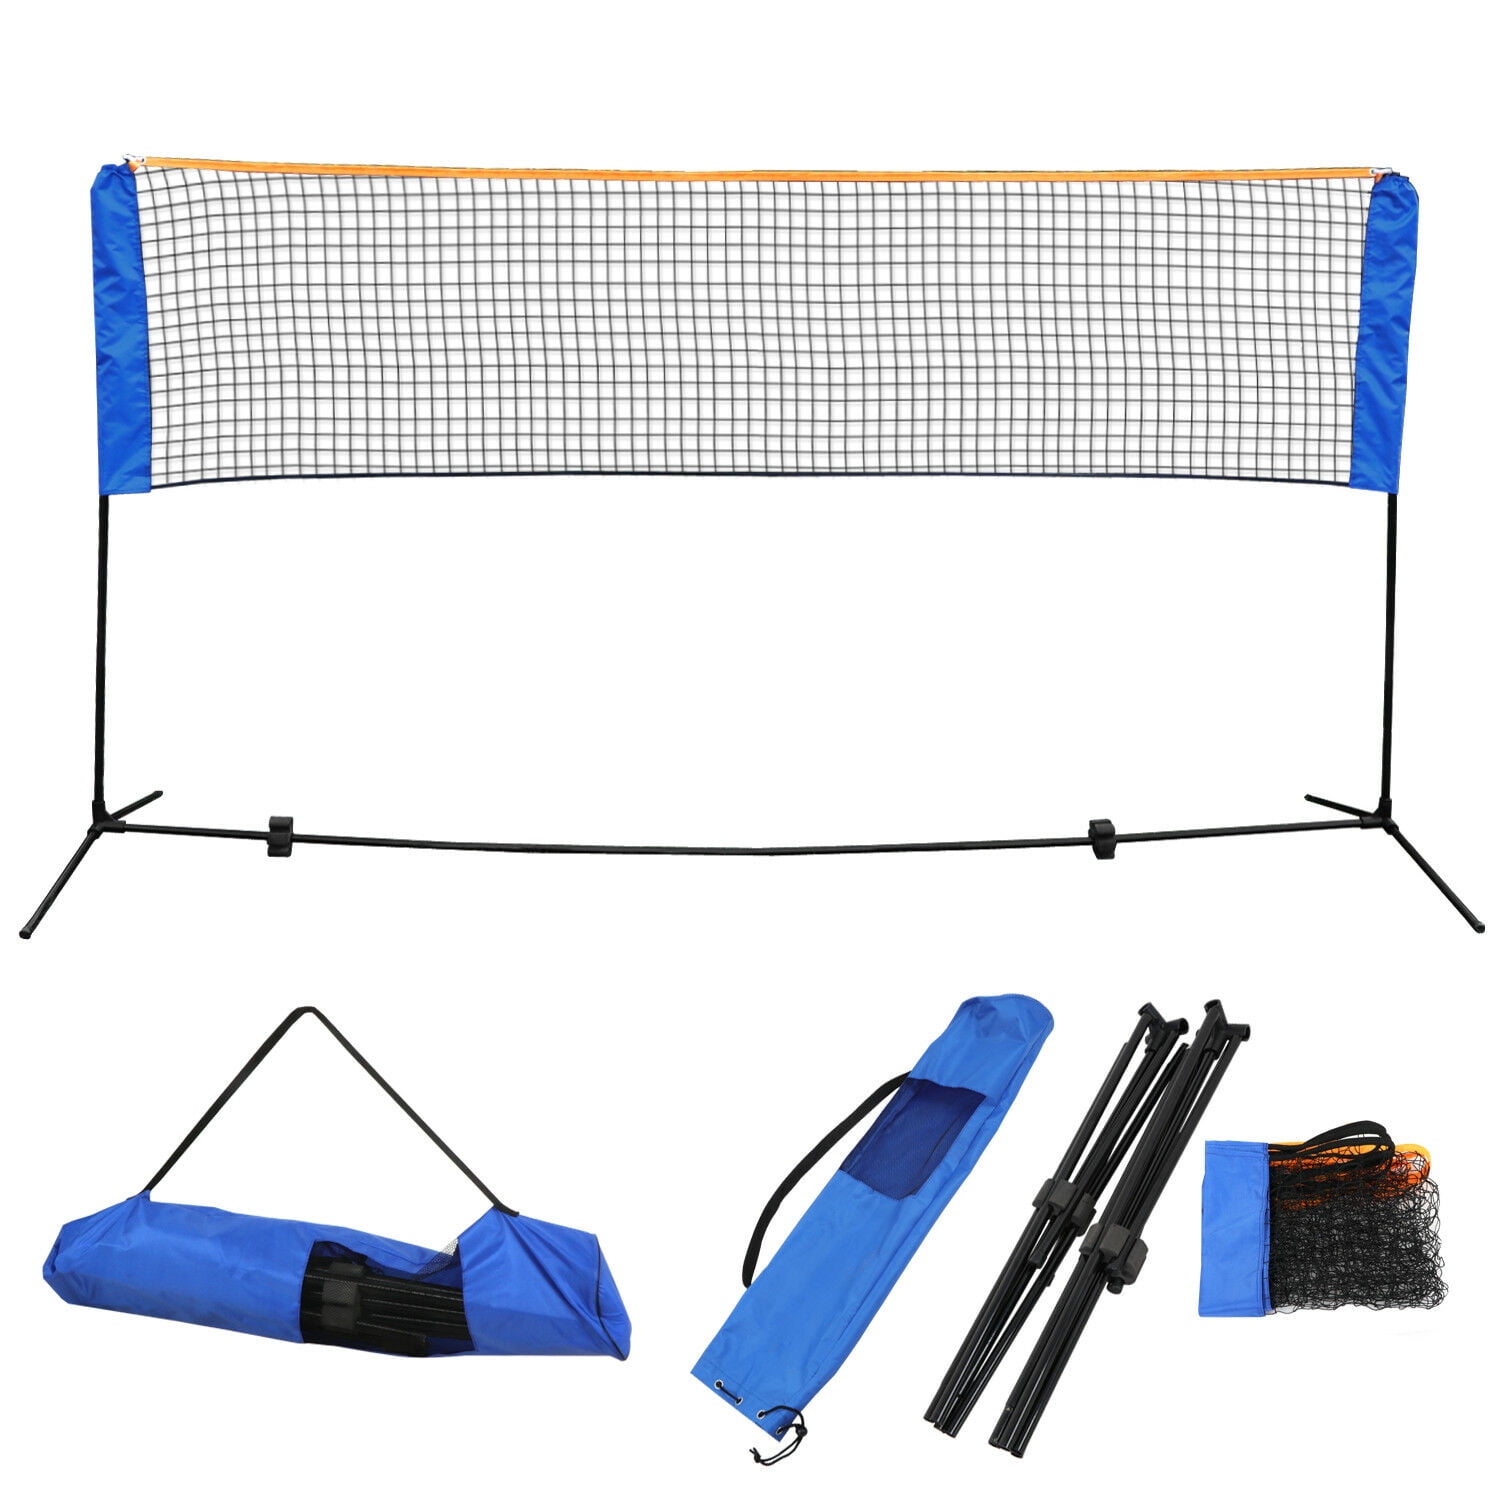 JINGZ Badminton Net Set,Easy Setup Volleyball Tennis Net Rack with Carry Bag for Home,Backyard Beach,Court,No Poles or Stakes Required